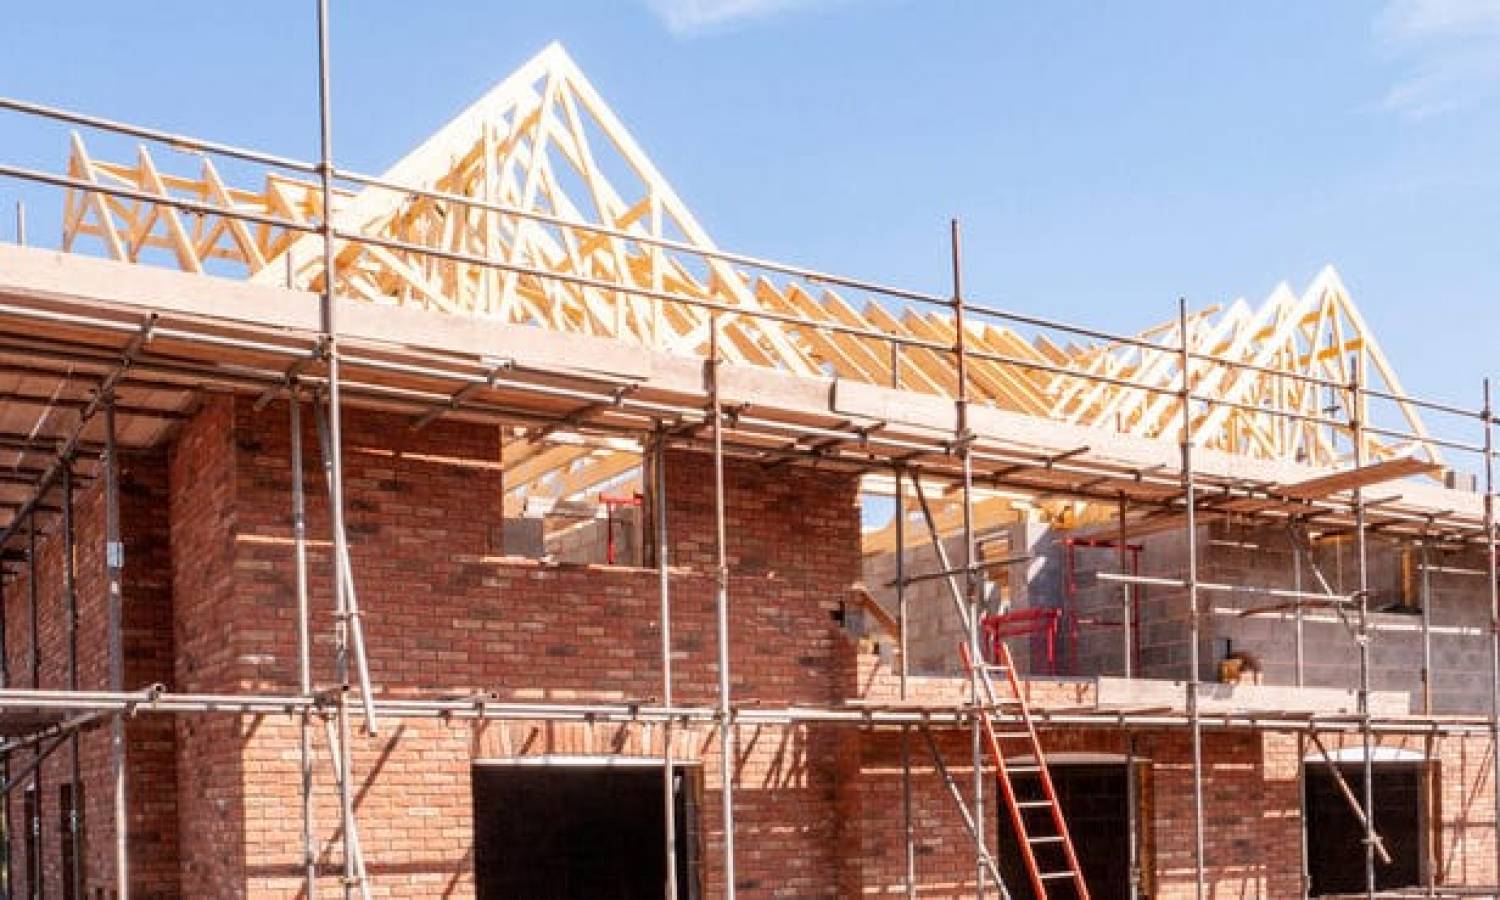 The government launches new space standards for permitted development homes